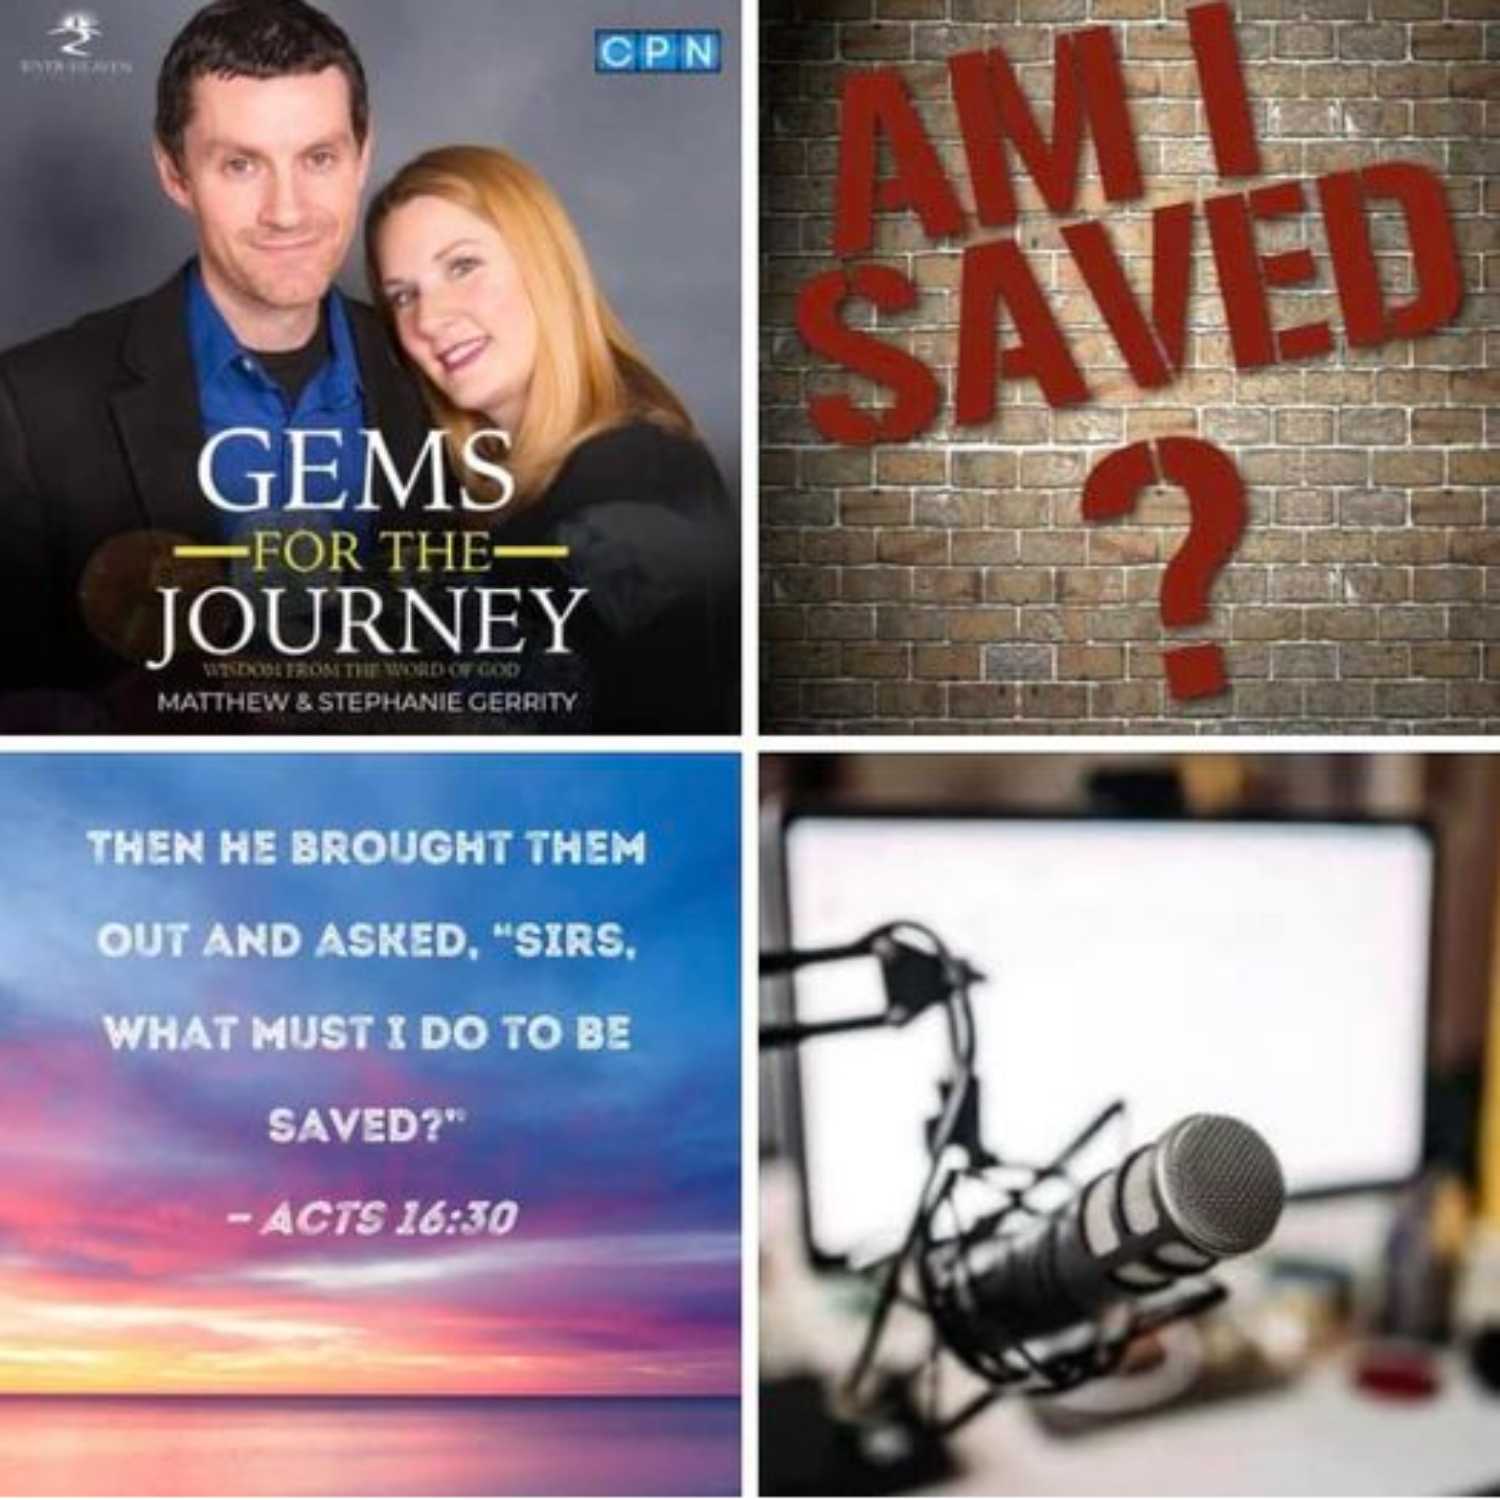 Gems For The Journey with Matthew and Stephanie Gerrity